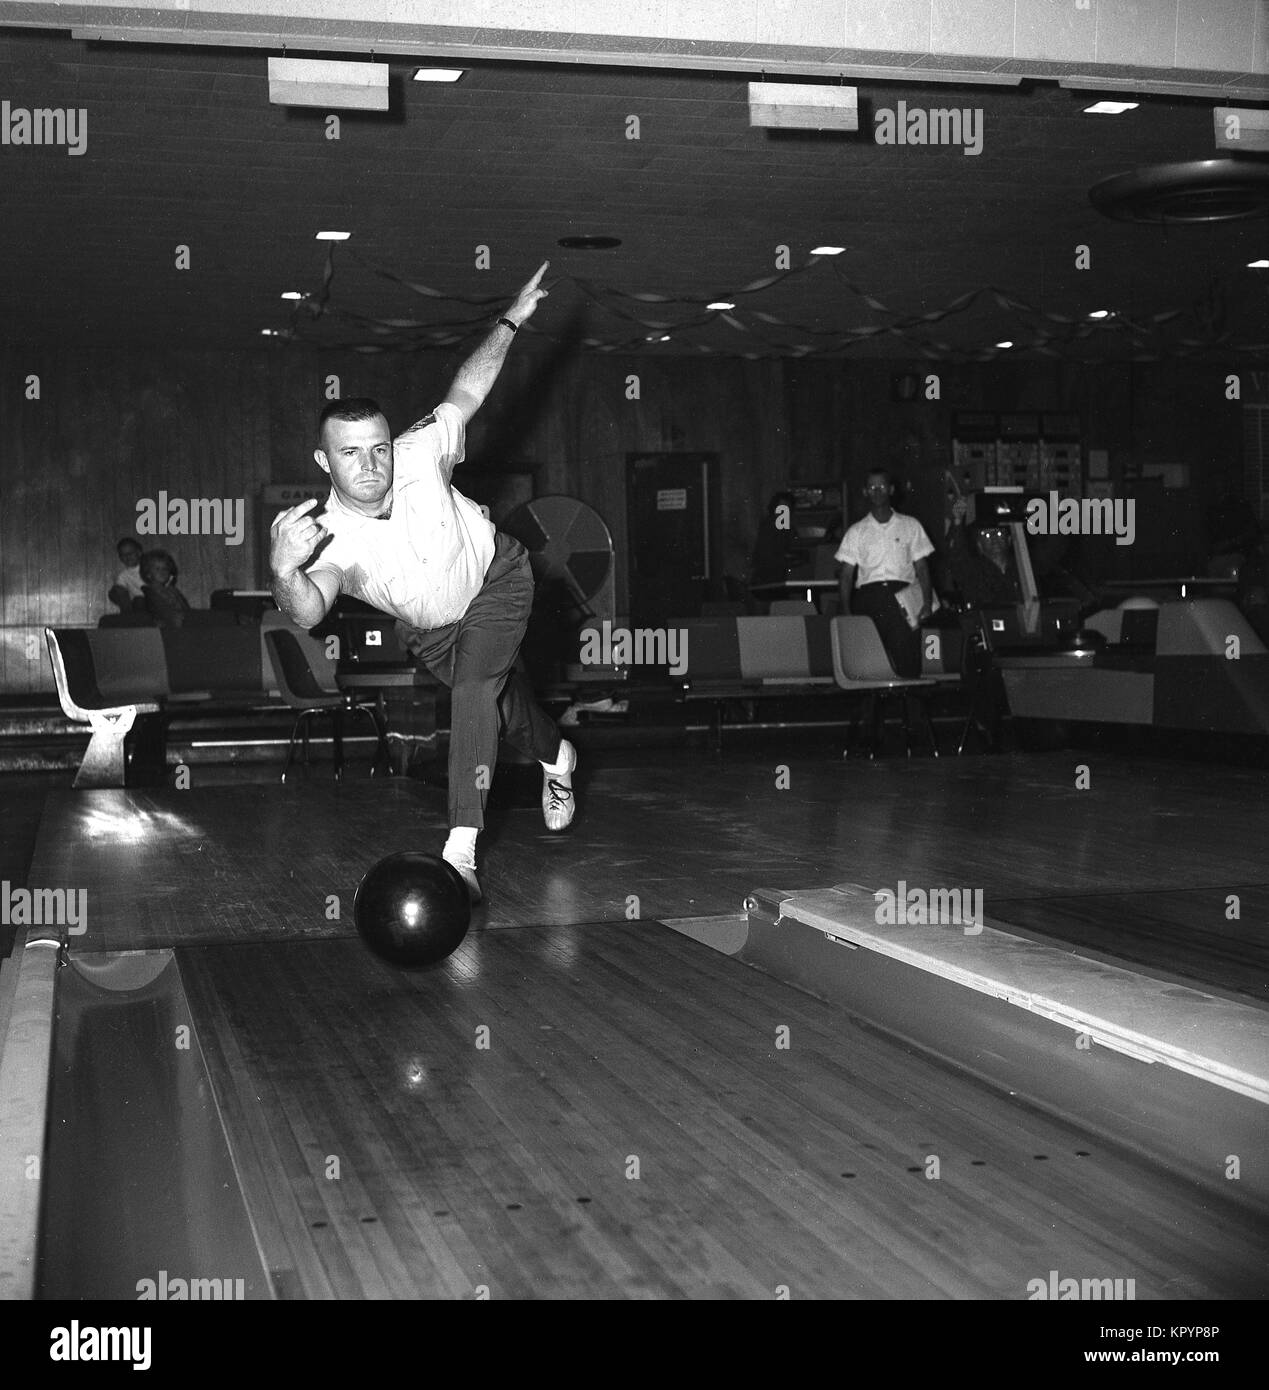 1960s, historical, ten-pin bowling, a man holding a bolwling ball about to throw it down a lane at a ten-pin bolwling alley, USA. Stock Photo